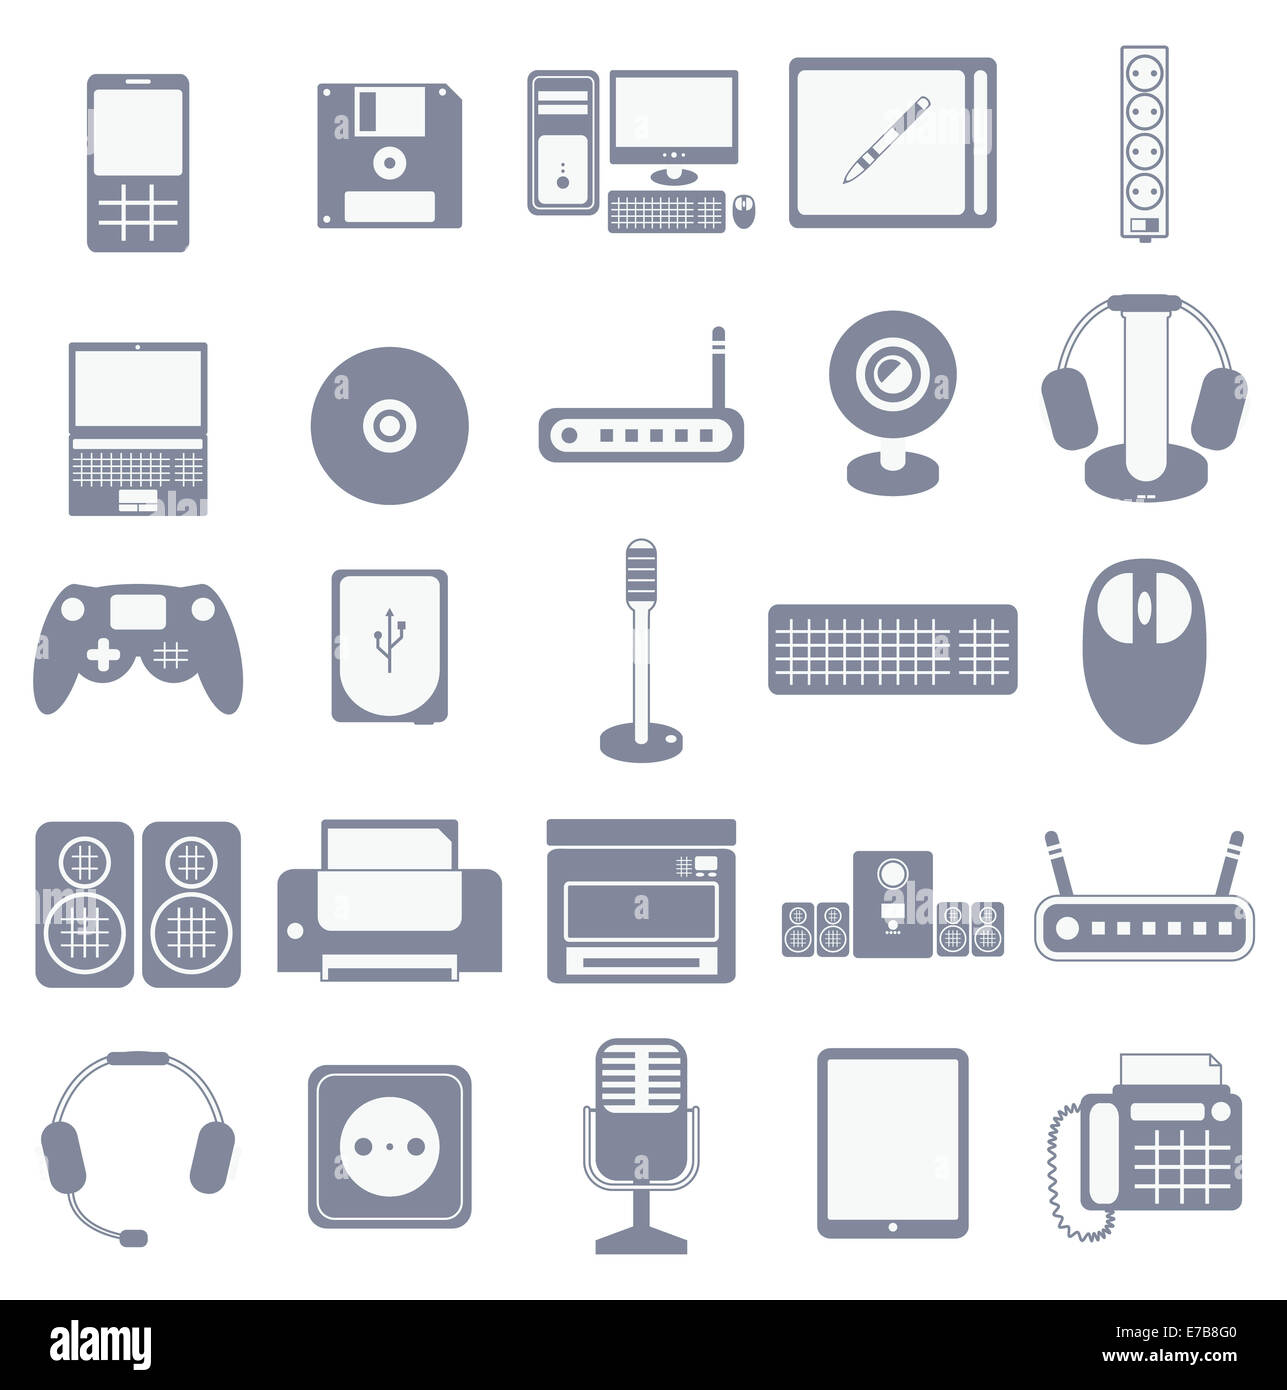 vector icon set of computer media gadgets and devices - isolated collection on white background Stock Photo